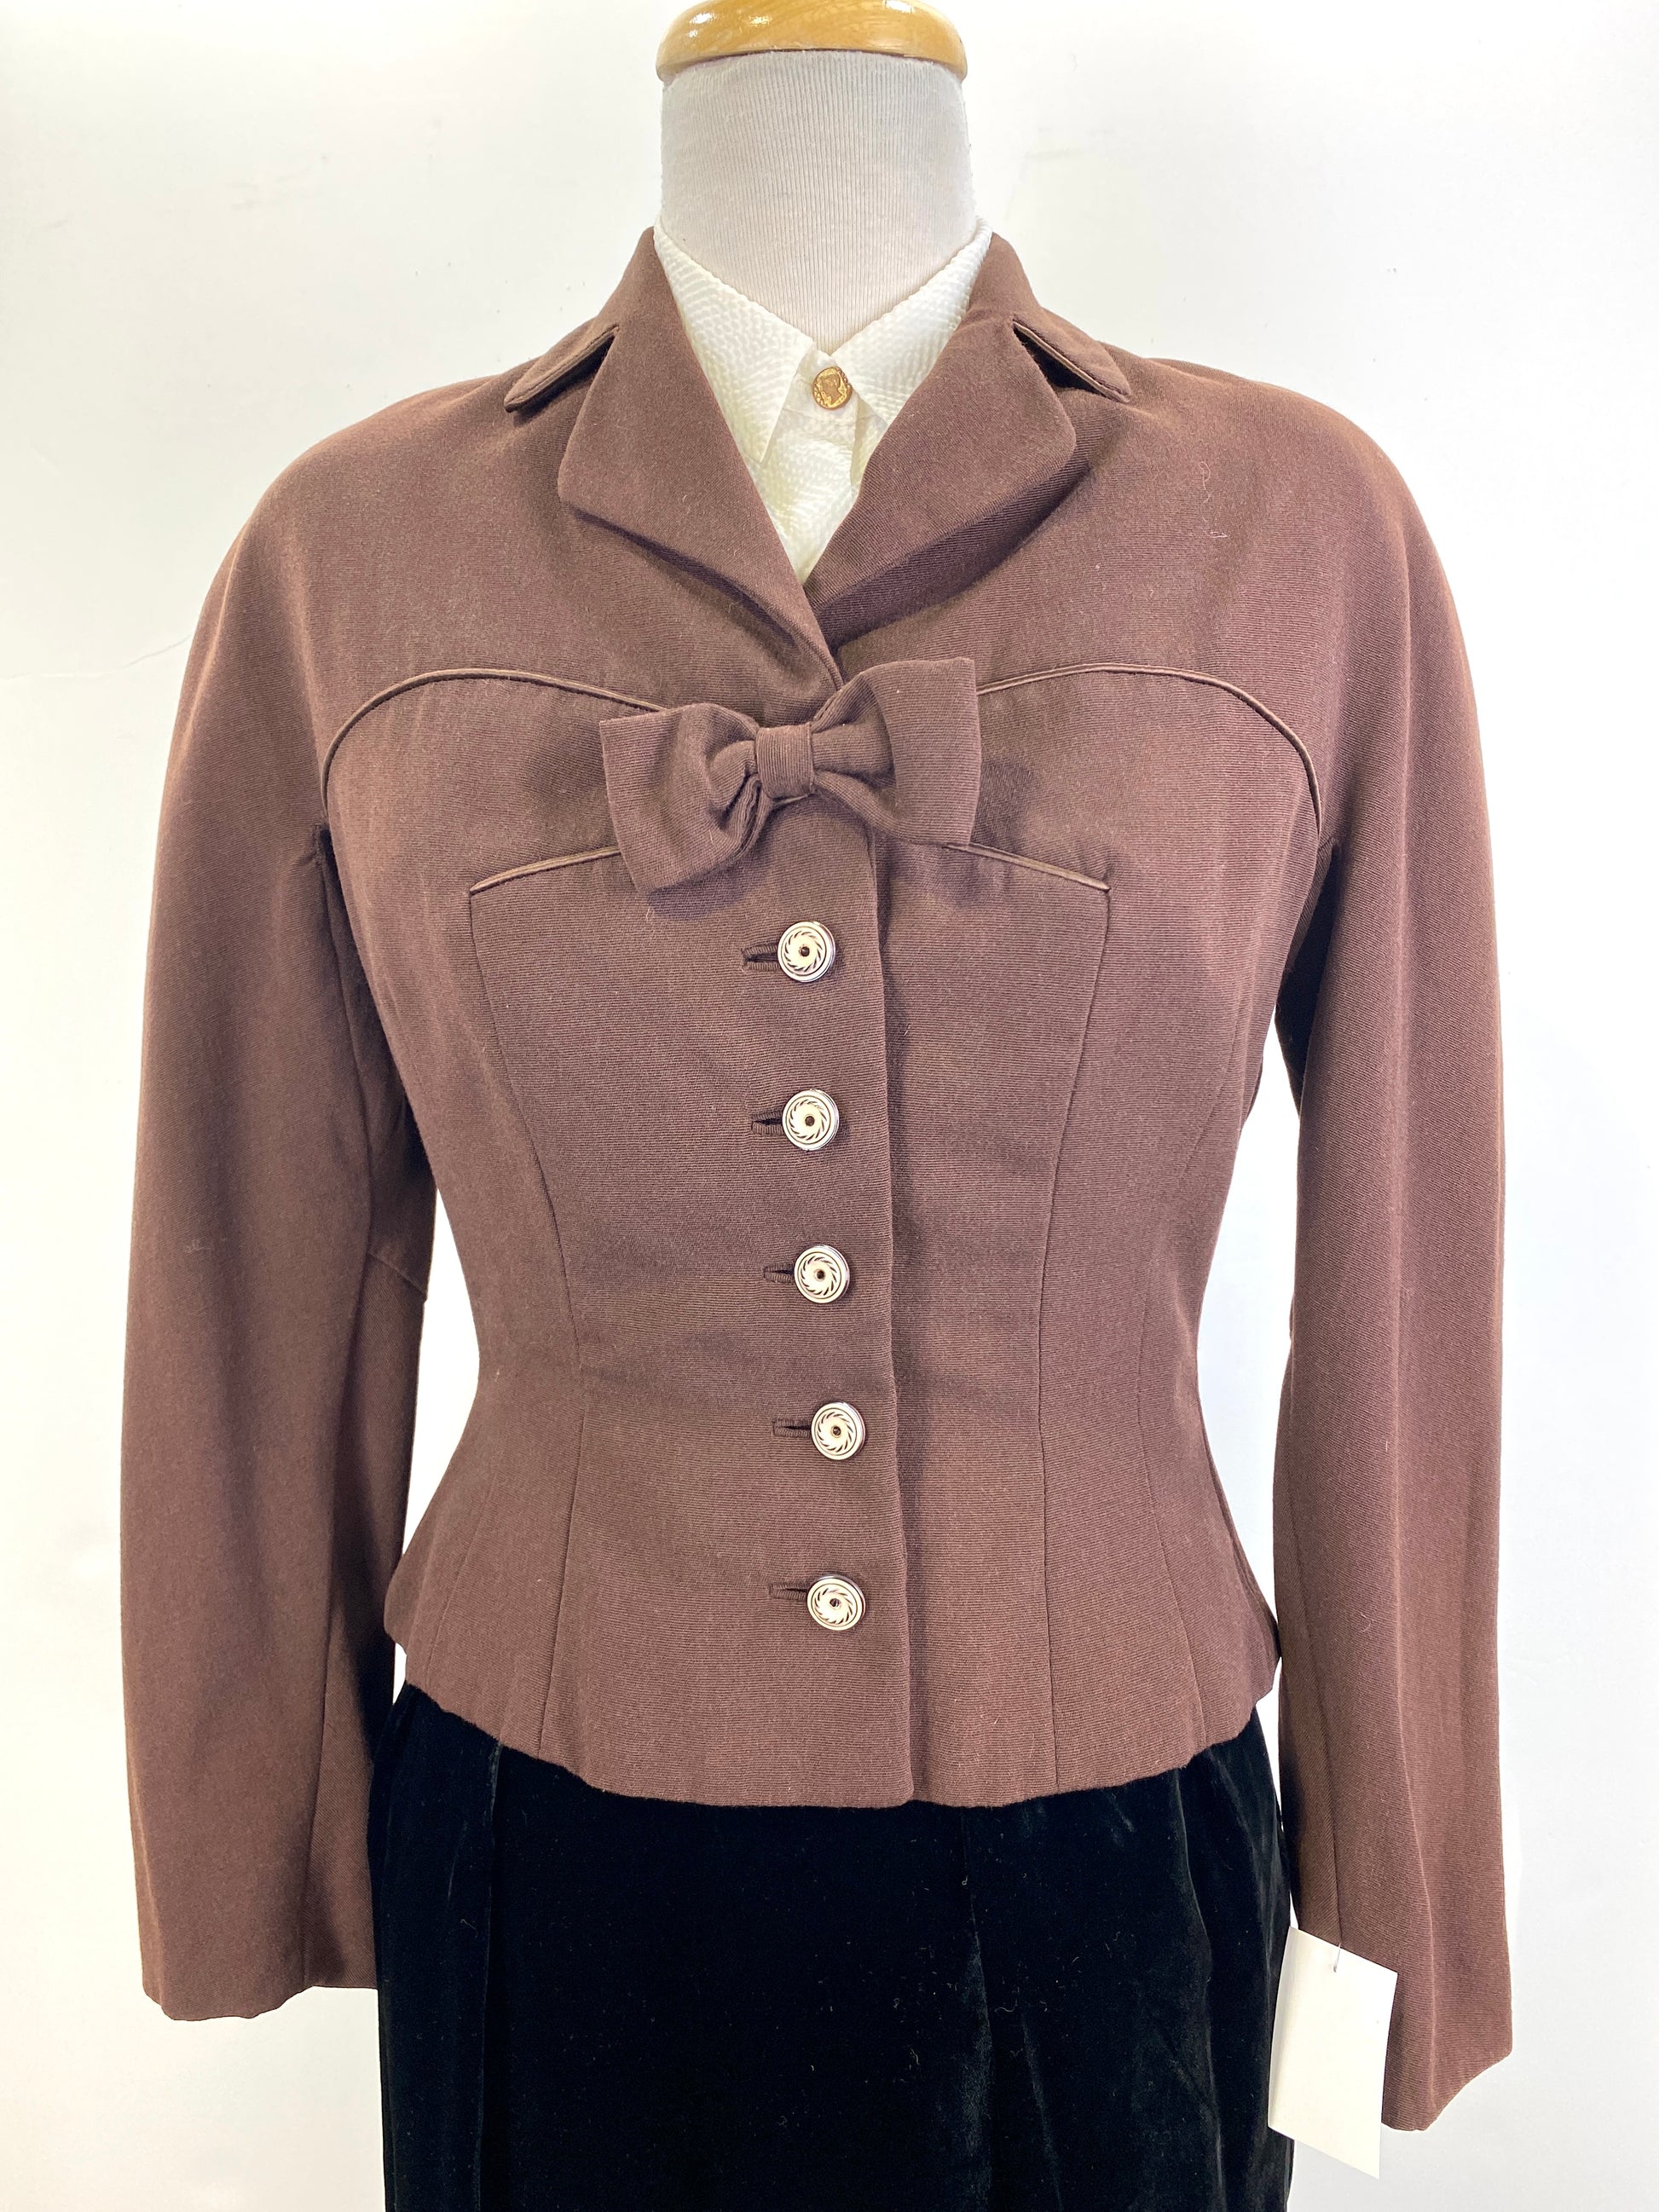 Vintage 1950s Women's Brown Wool Fitted Jacket, Small